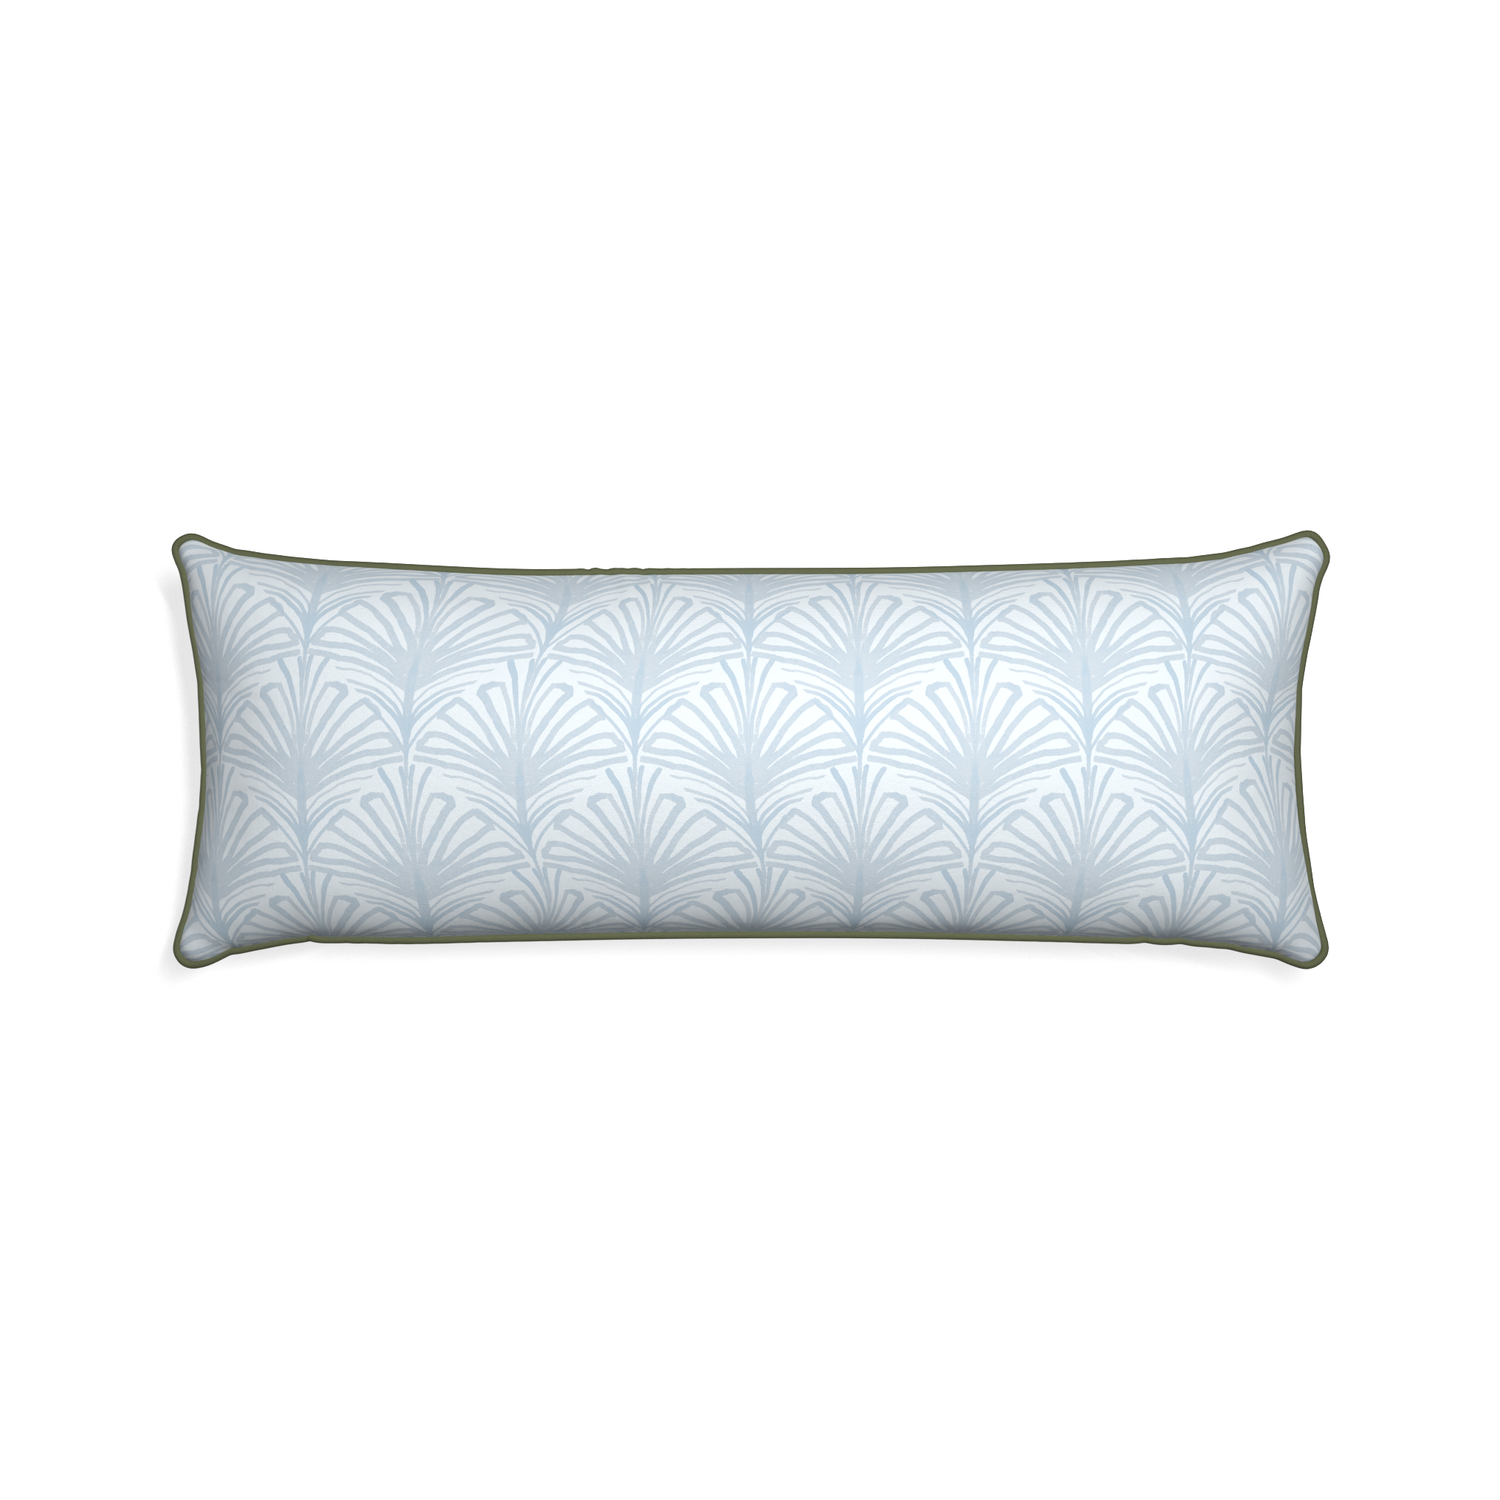 Xl-lumbar suzy sky custom pillow with f piping on white background